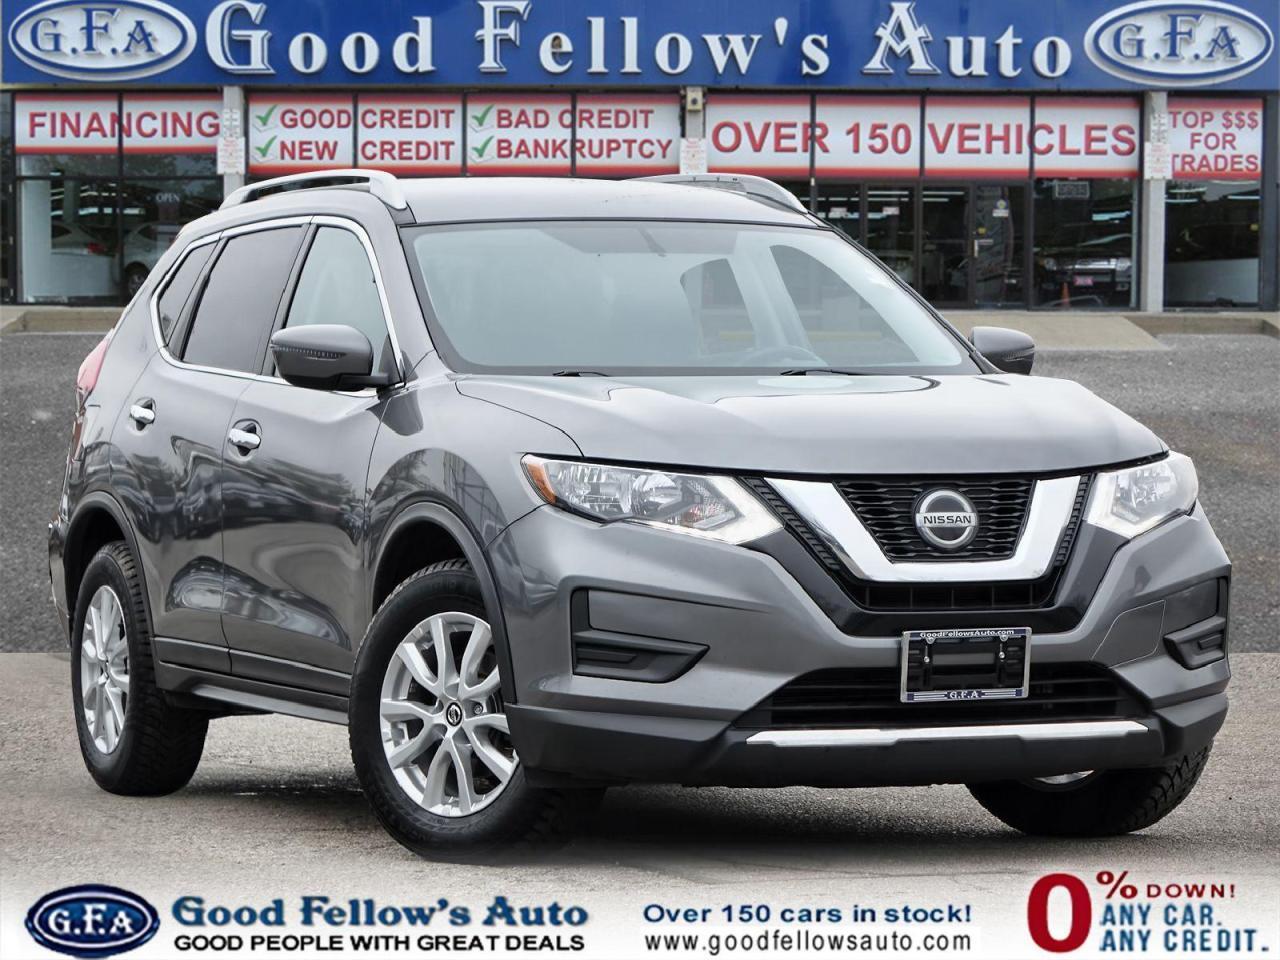 2020 Nissan Rogue SPECIAL EDITION, AWD, REARVIEW CAMERA, HEATED SEAT